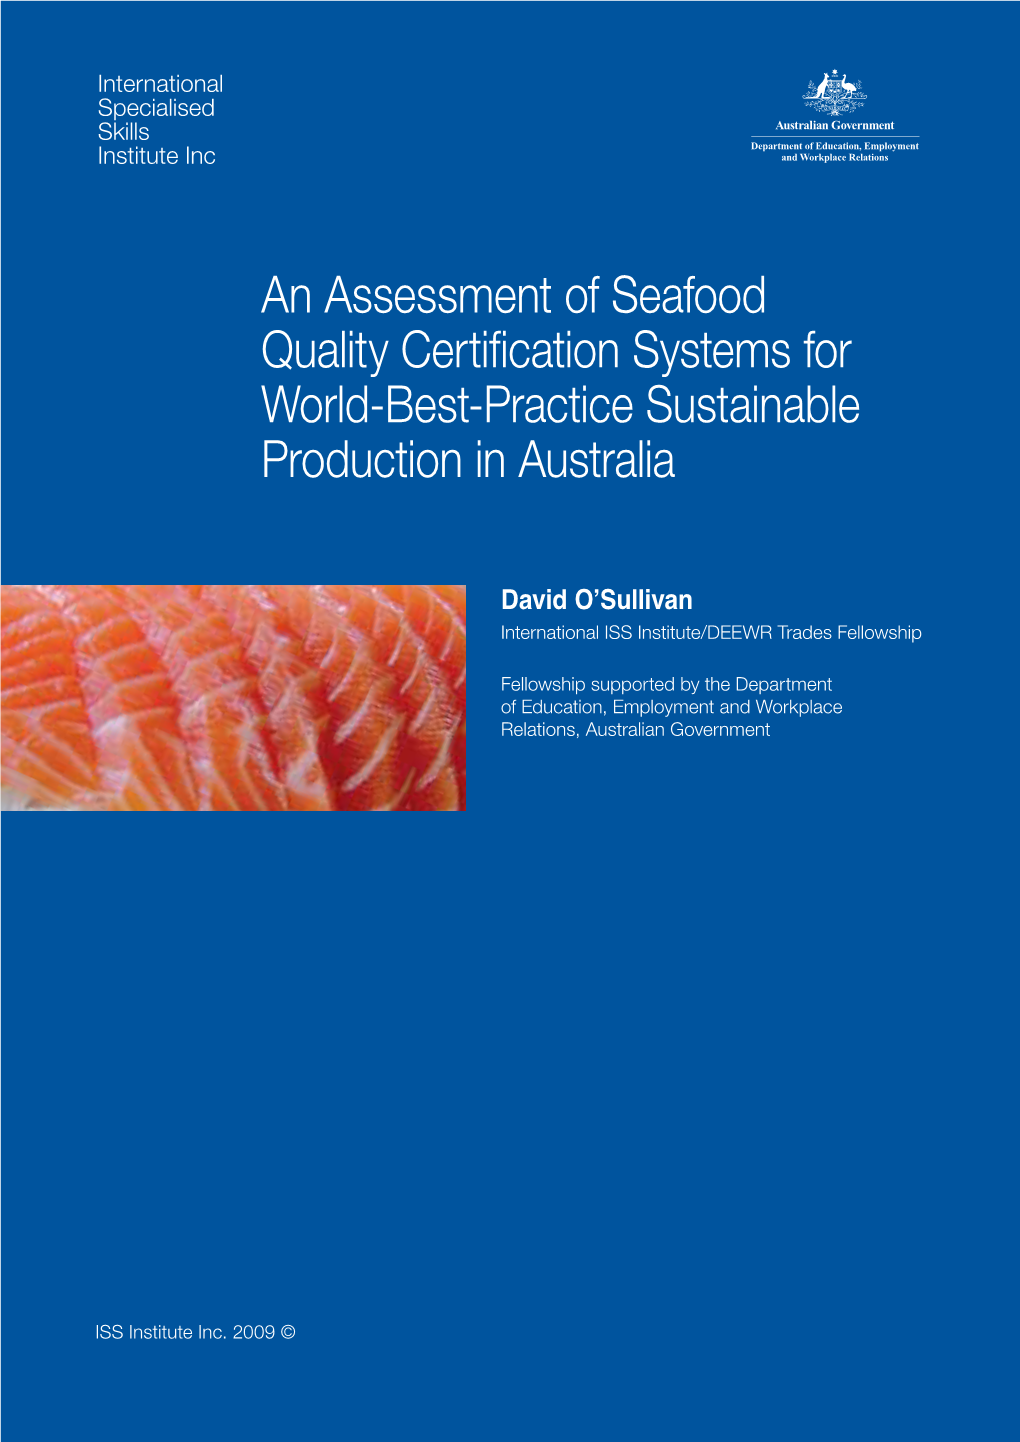 An Assessment of Seafood Quality Certification Systems for World-Best-Practice Sustainable Production in Australia